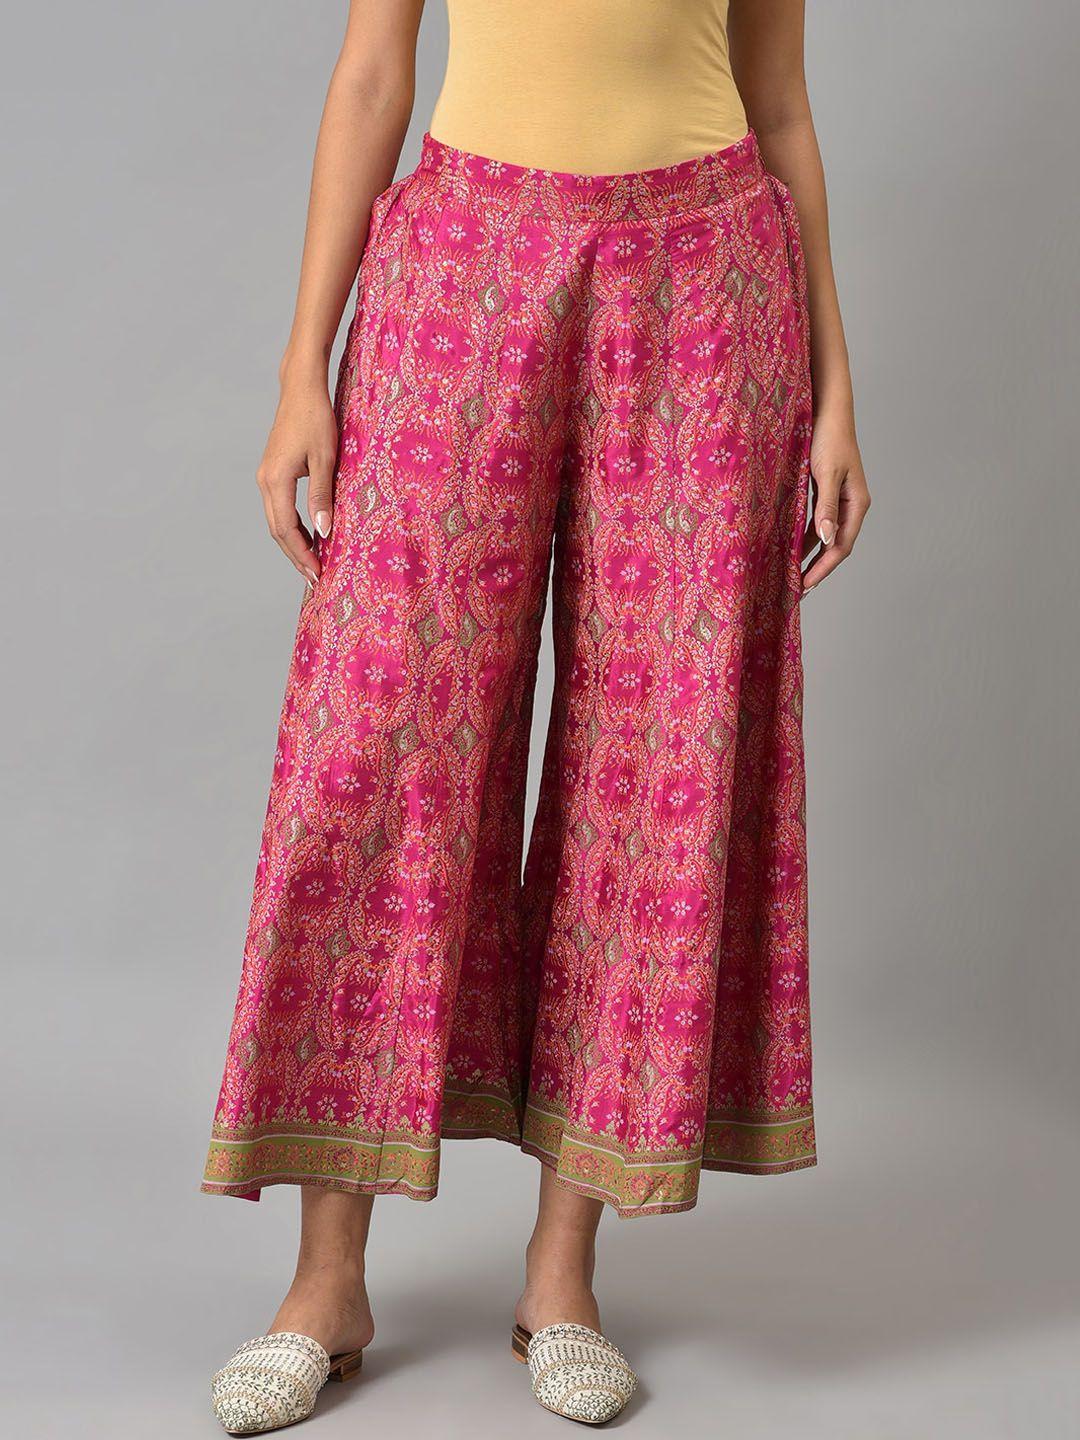 w women berry pink floral printed maxi skirts